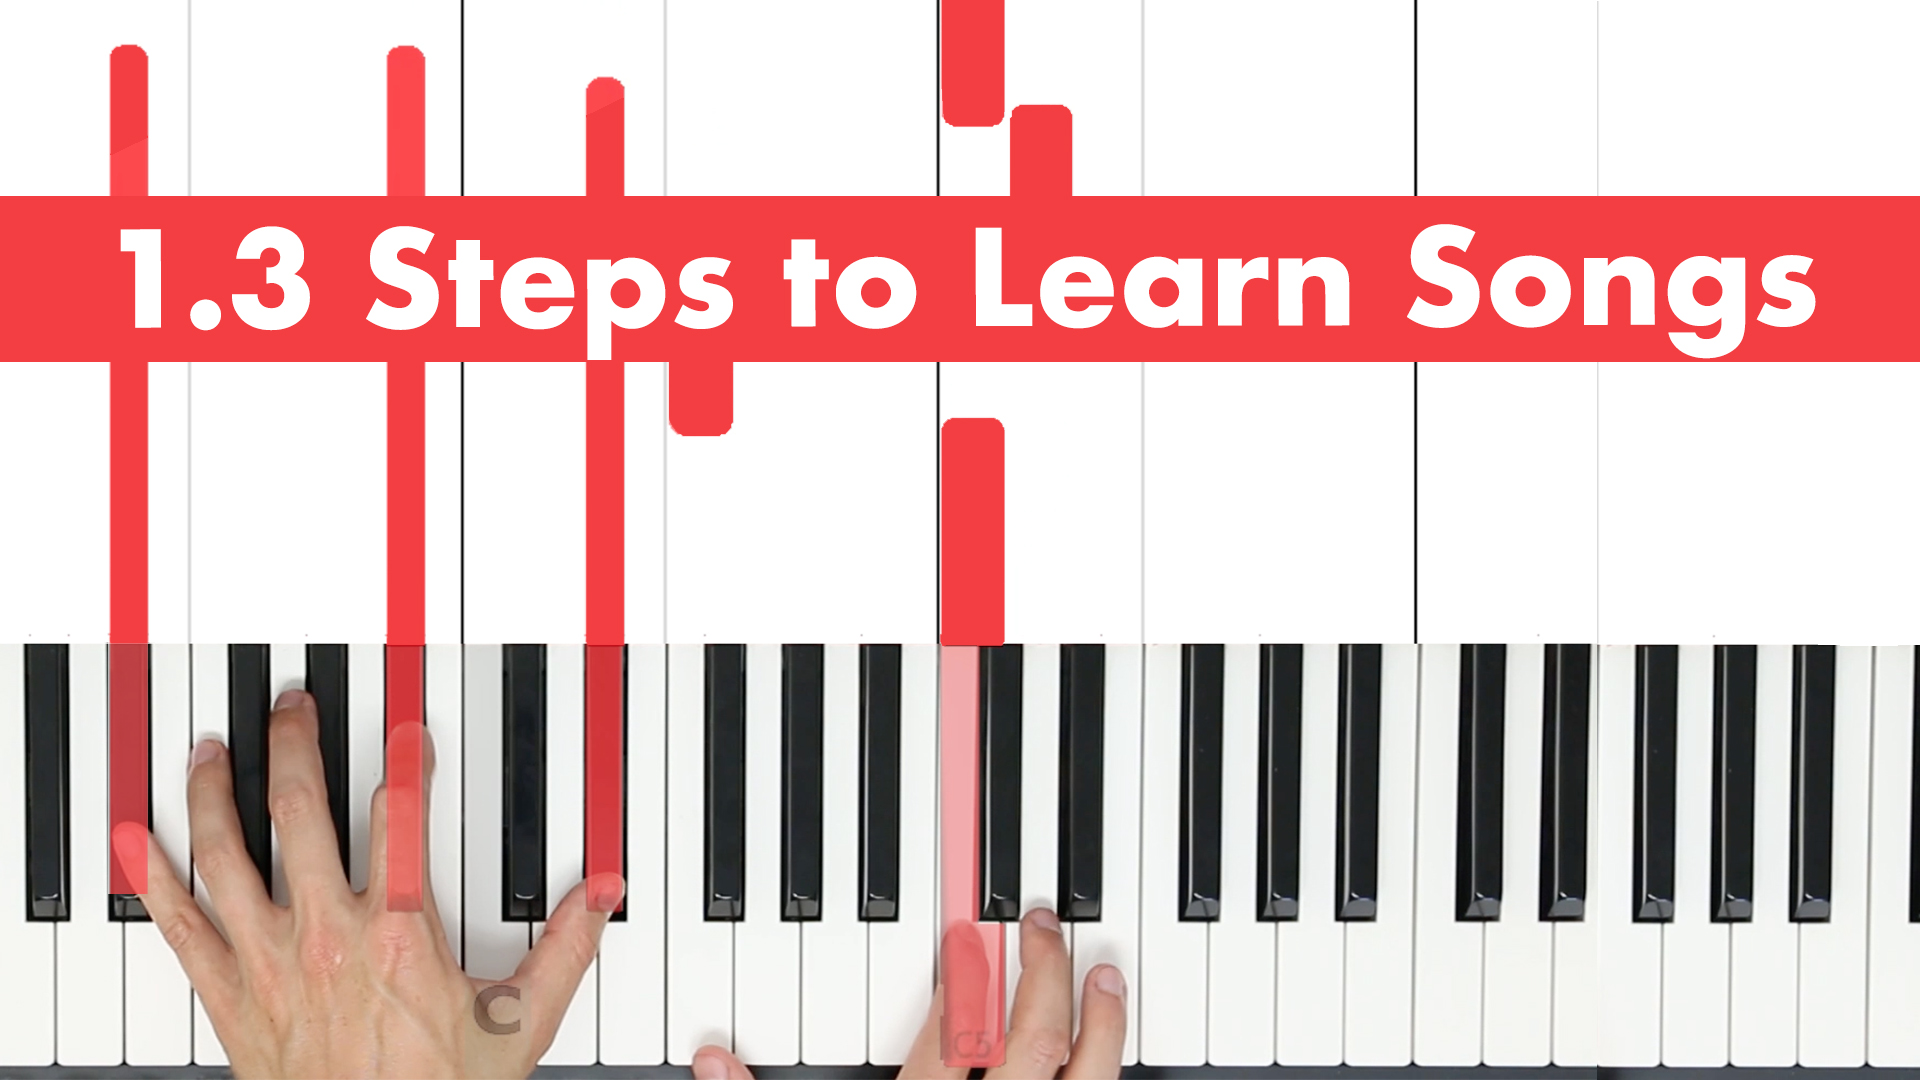 1.3 Steps To Learn Songs